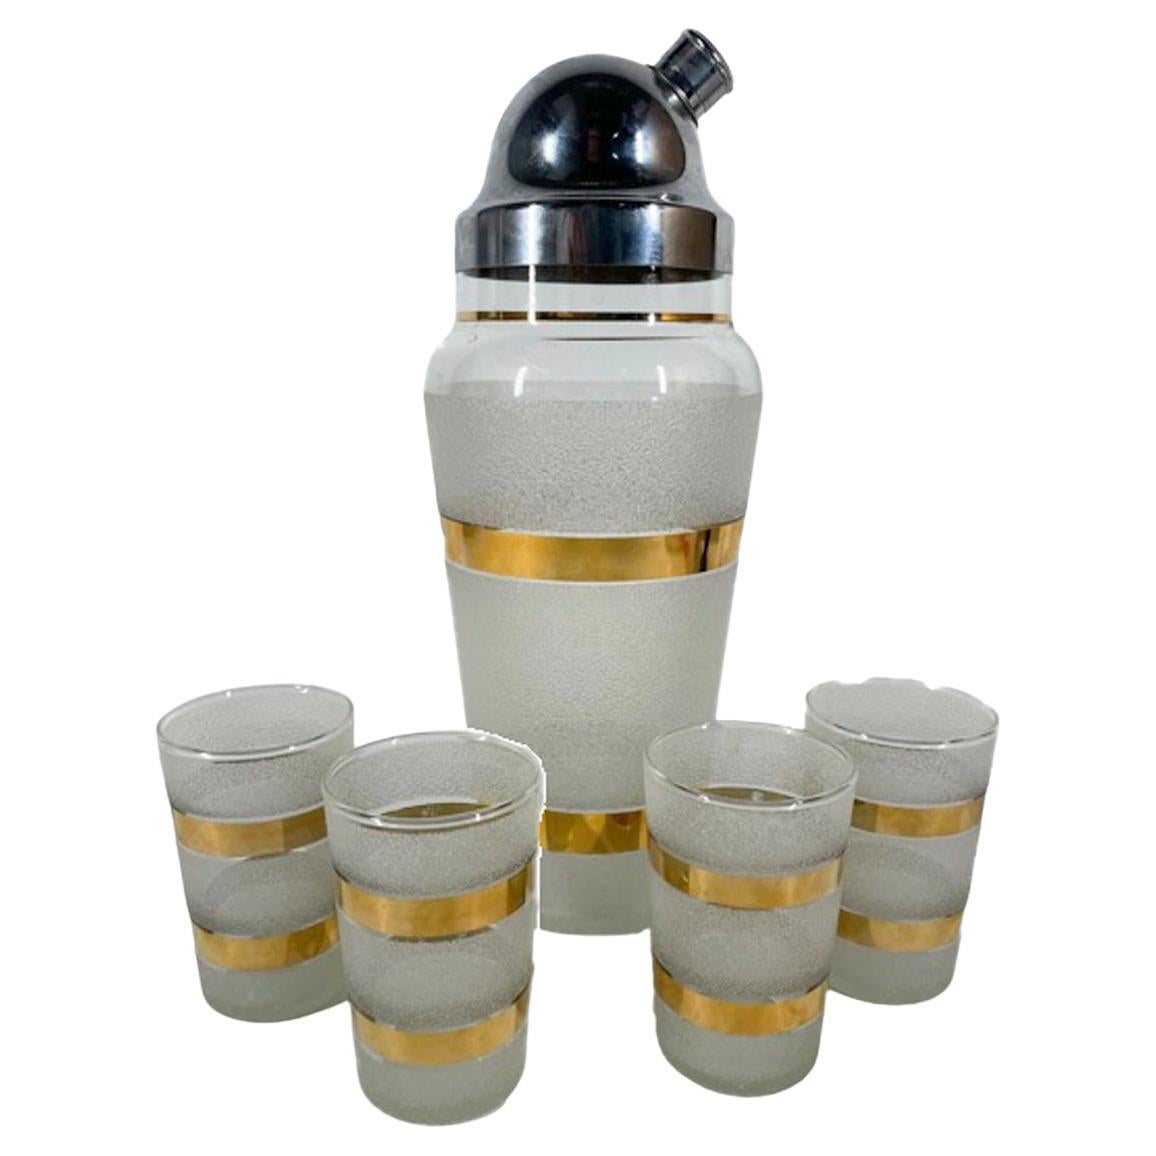 Vintage Cocktail Shaker Set with Gold Bands and Textured Frosted Surface